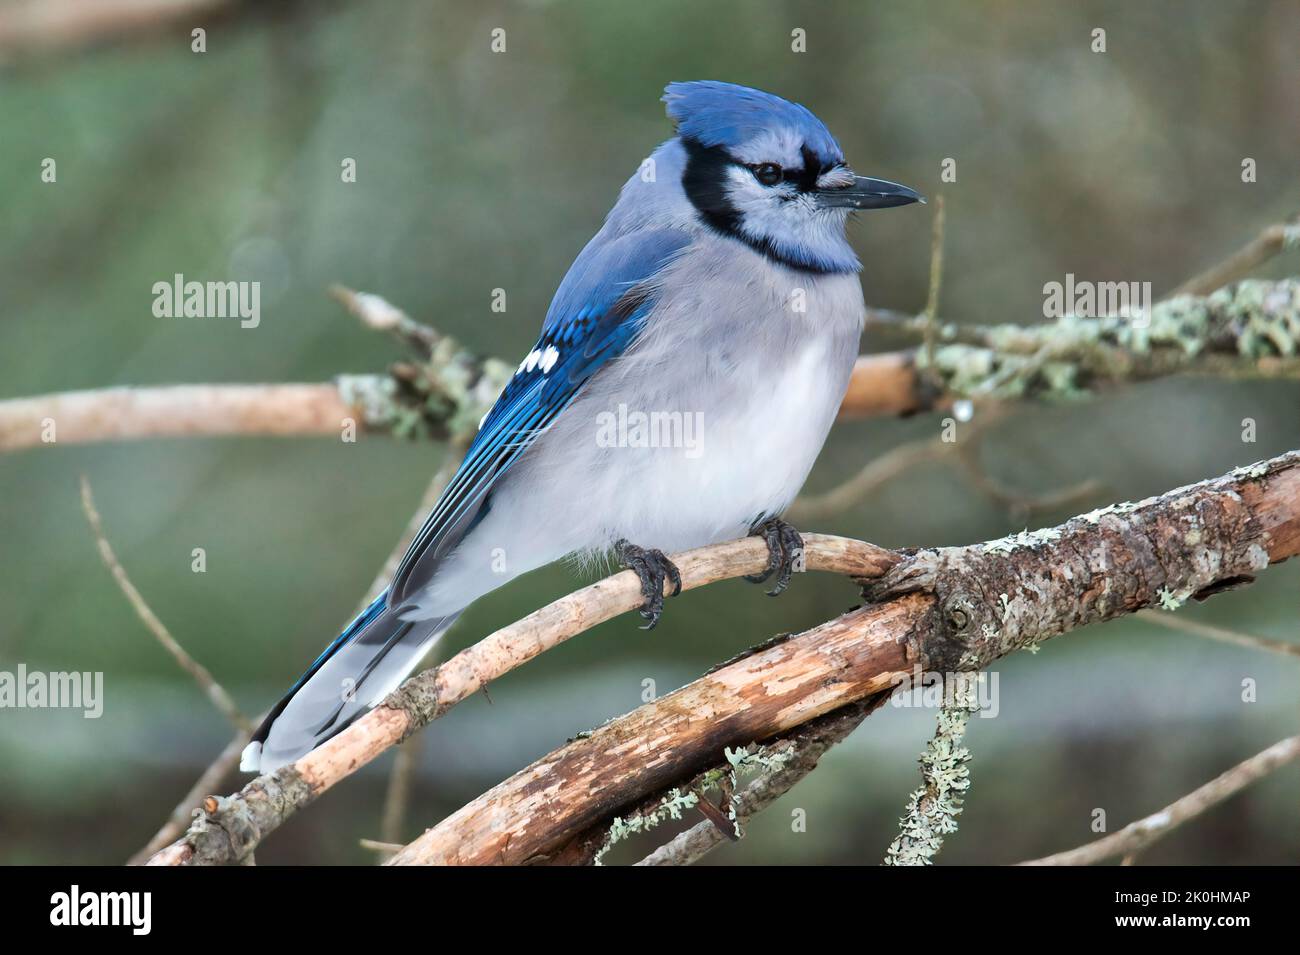 A blue jay perching on a tree branch Stock Photo